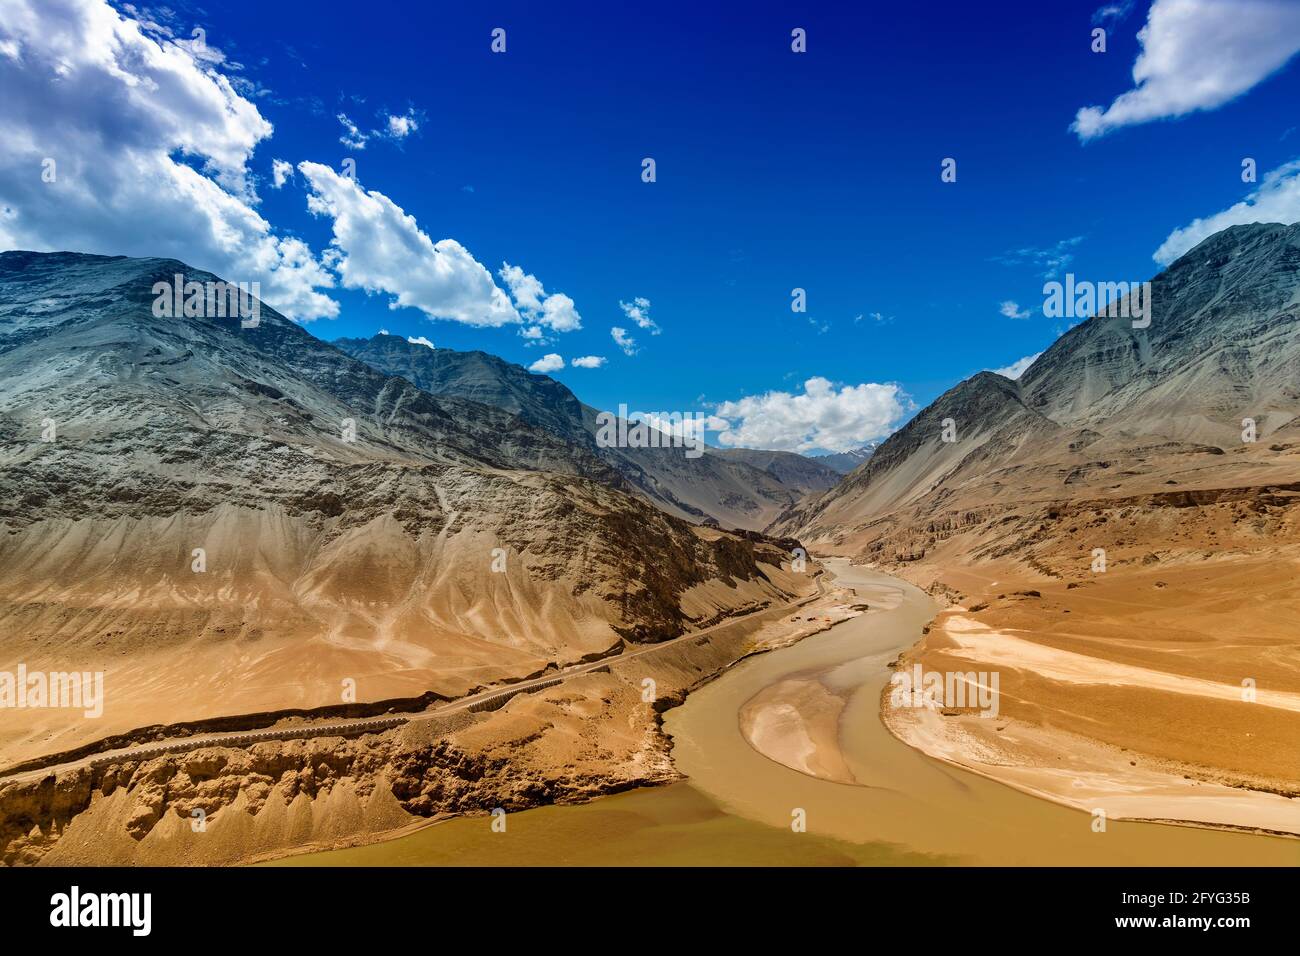 Scenic view of Confluence of Zanskar river from left and Indus rivers from up right - Leh, Ladakh, Jammu and Kashmir, India. Famous tourist spot of La Stock Photo